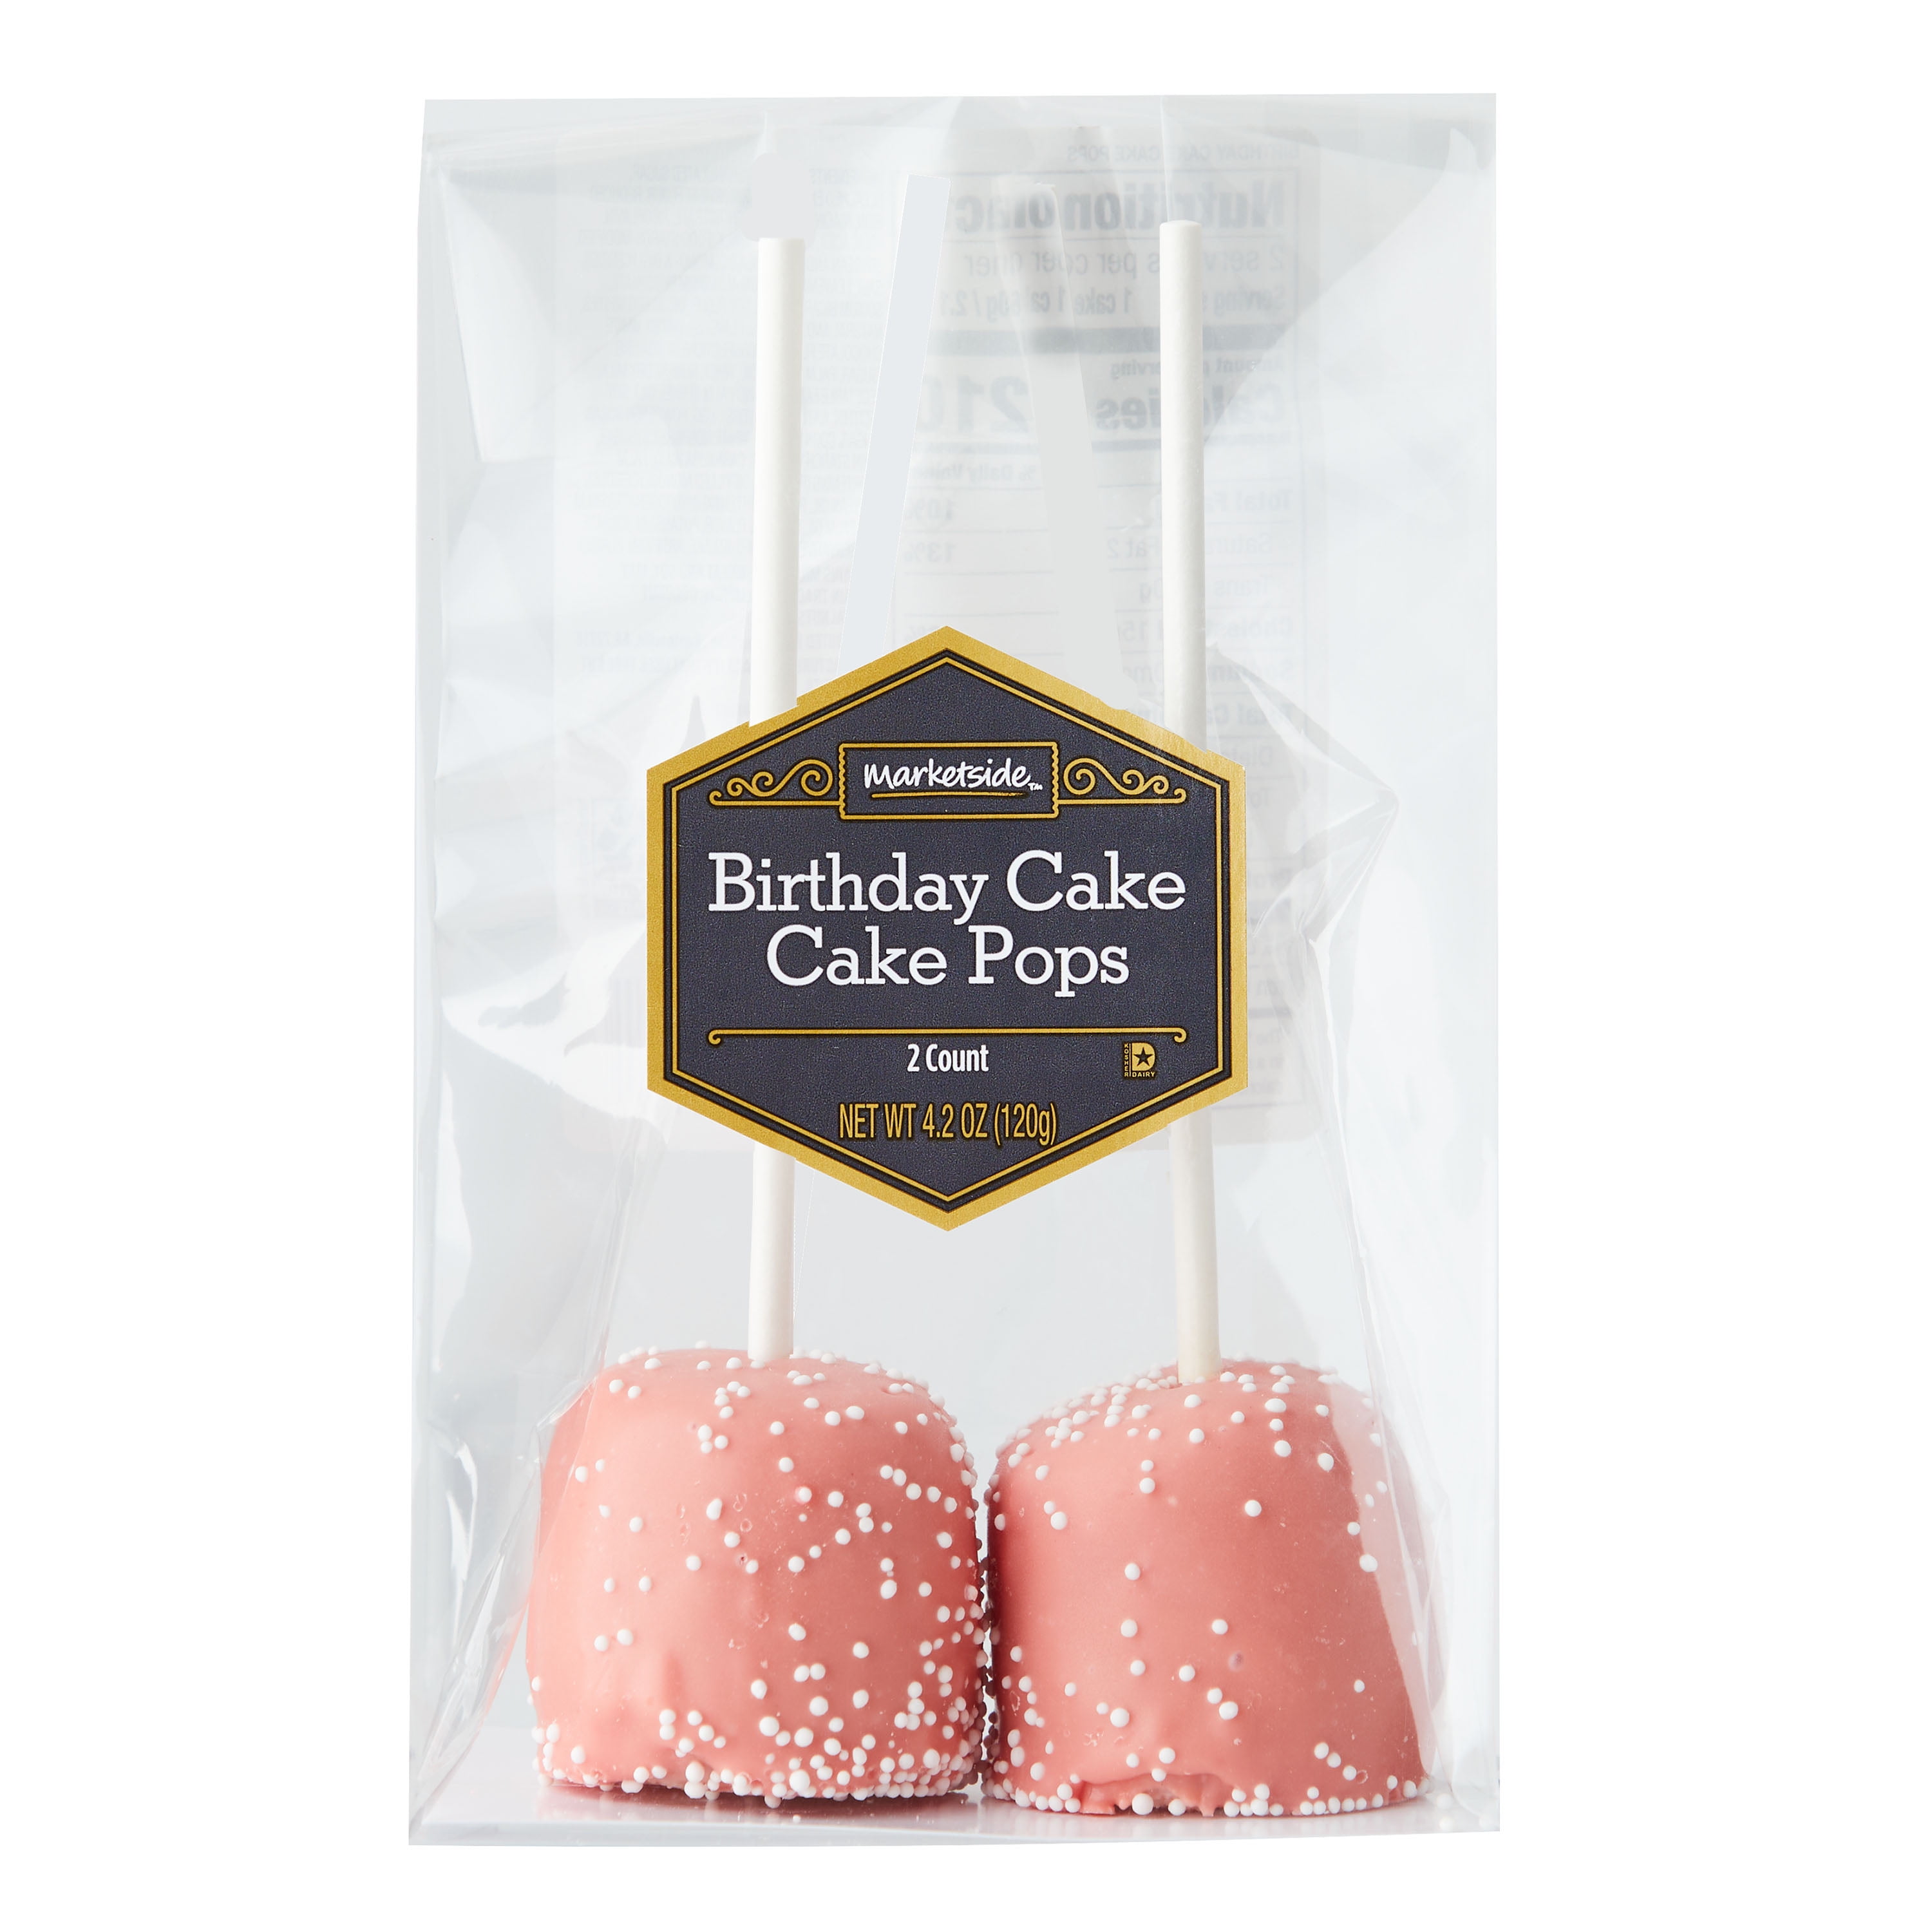 Marketside Birthday Cake Flavored Cake Pops, Ready to Eat, 4.2 Ounces, 2  Count per Pack